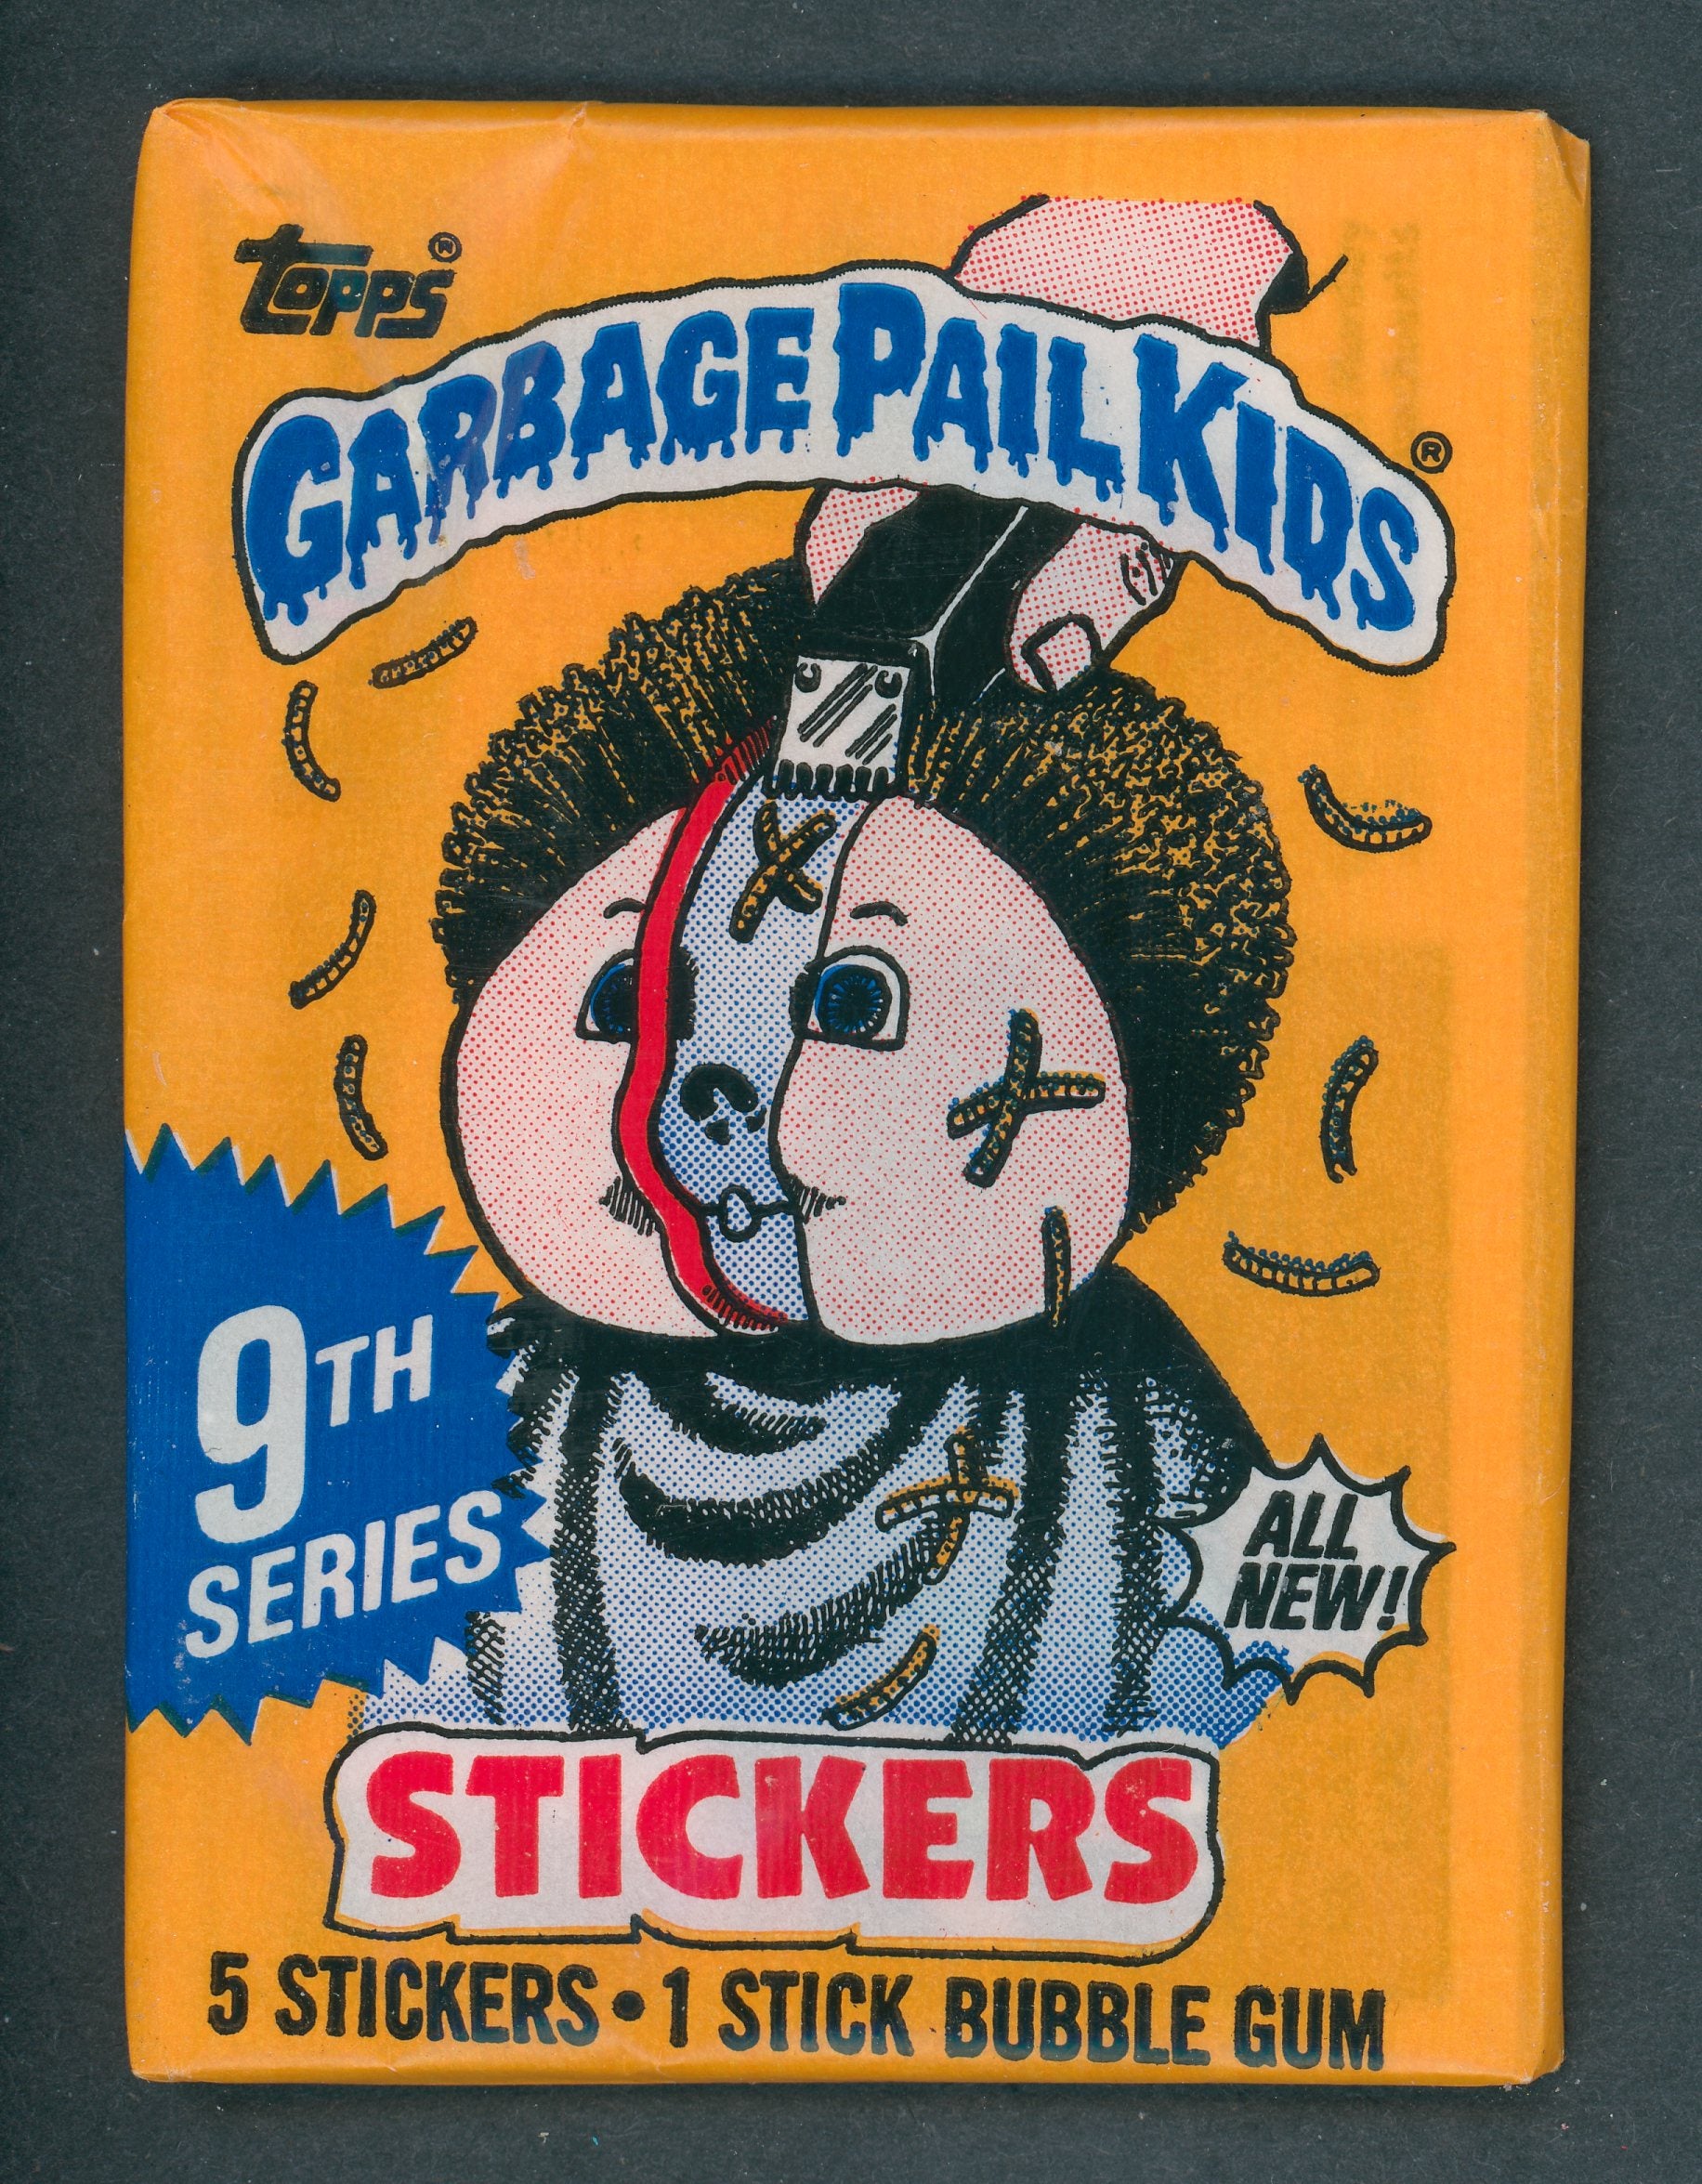 1987 Topps Garbage Pail Kids Series 9 Unopened Wax Pack (All New) (Canada)